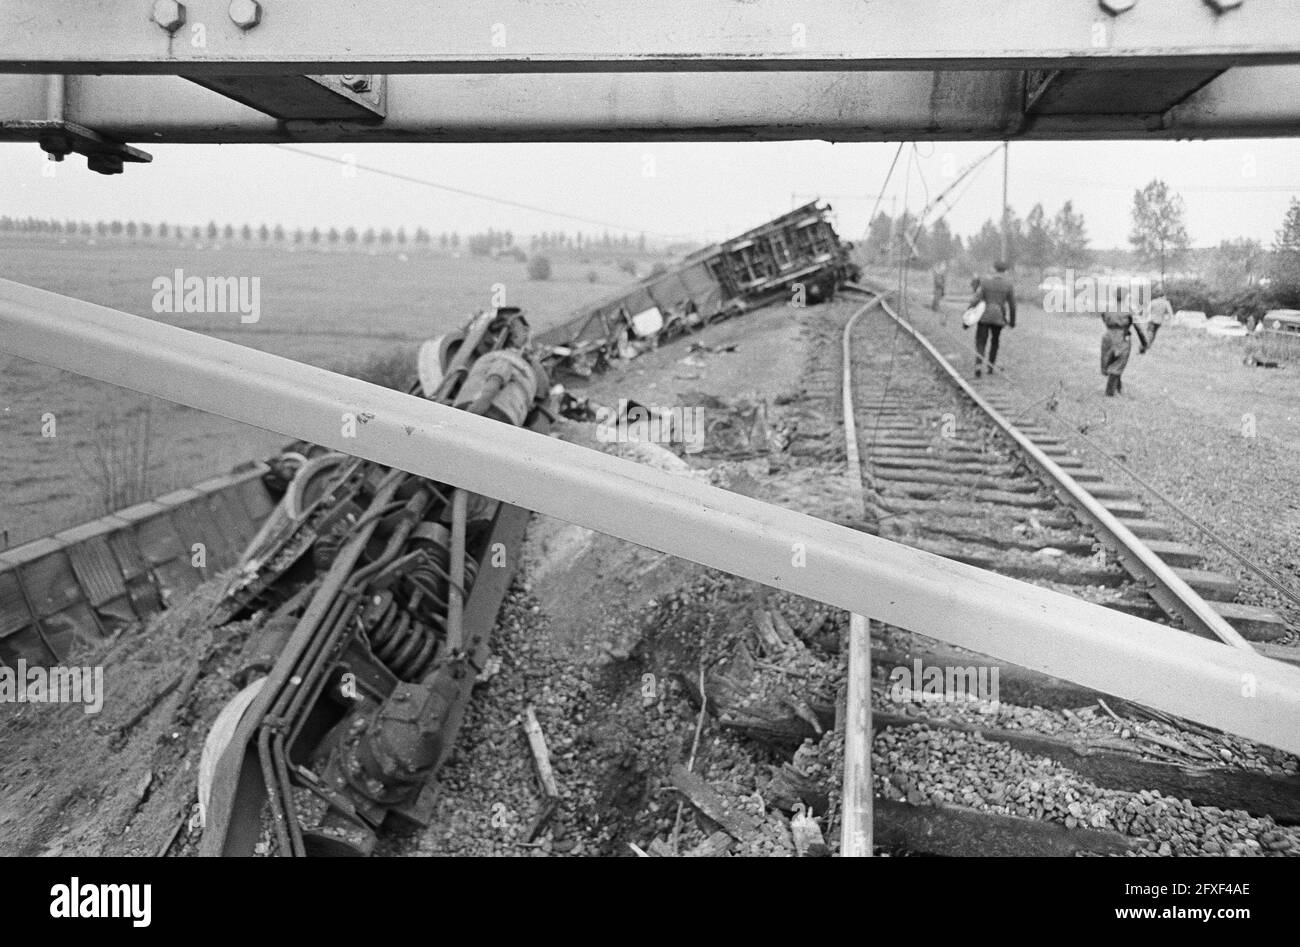 Train derailed near Hedel (Gelderland), May 31, 1966, accidents, railroads, trains, The Netherlands, 20th century press agency photo, news to remember, documentary, historic photography 1945-1990, visual stories, human history of the Twentieth Century, capturing moments in time Stock Photo